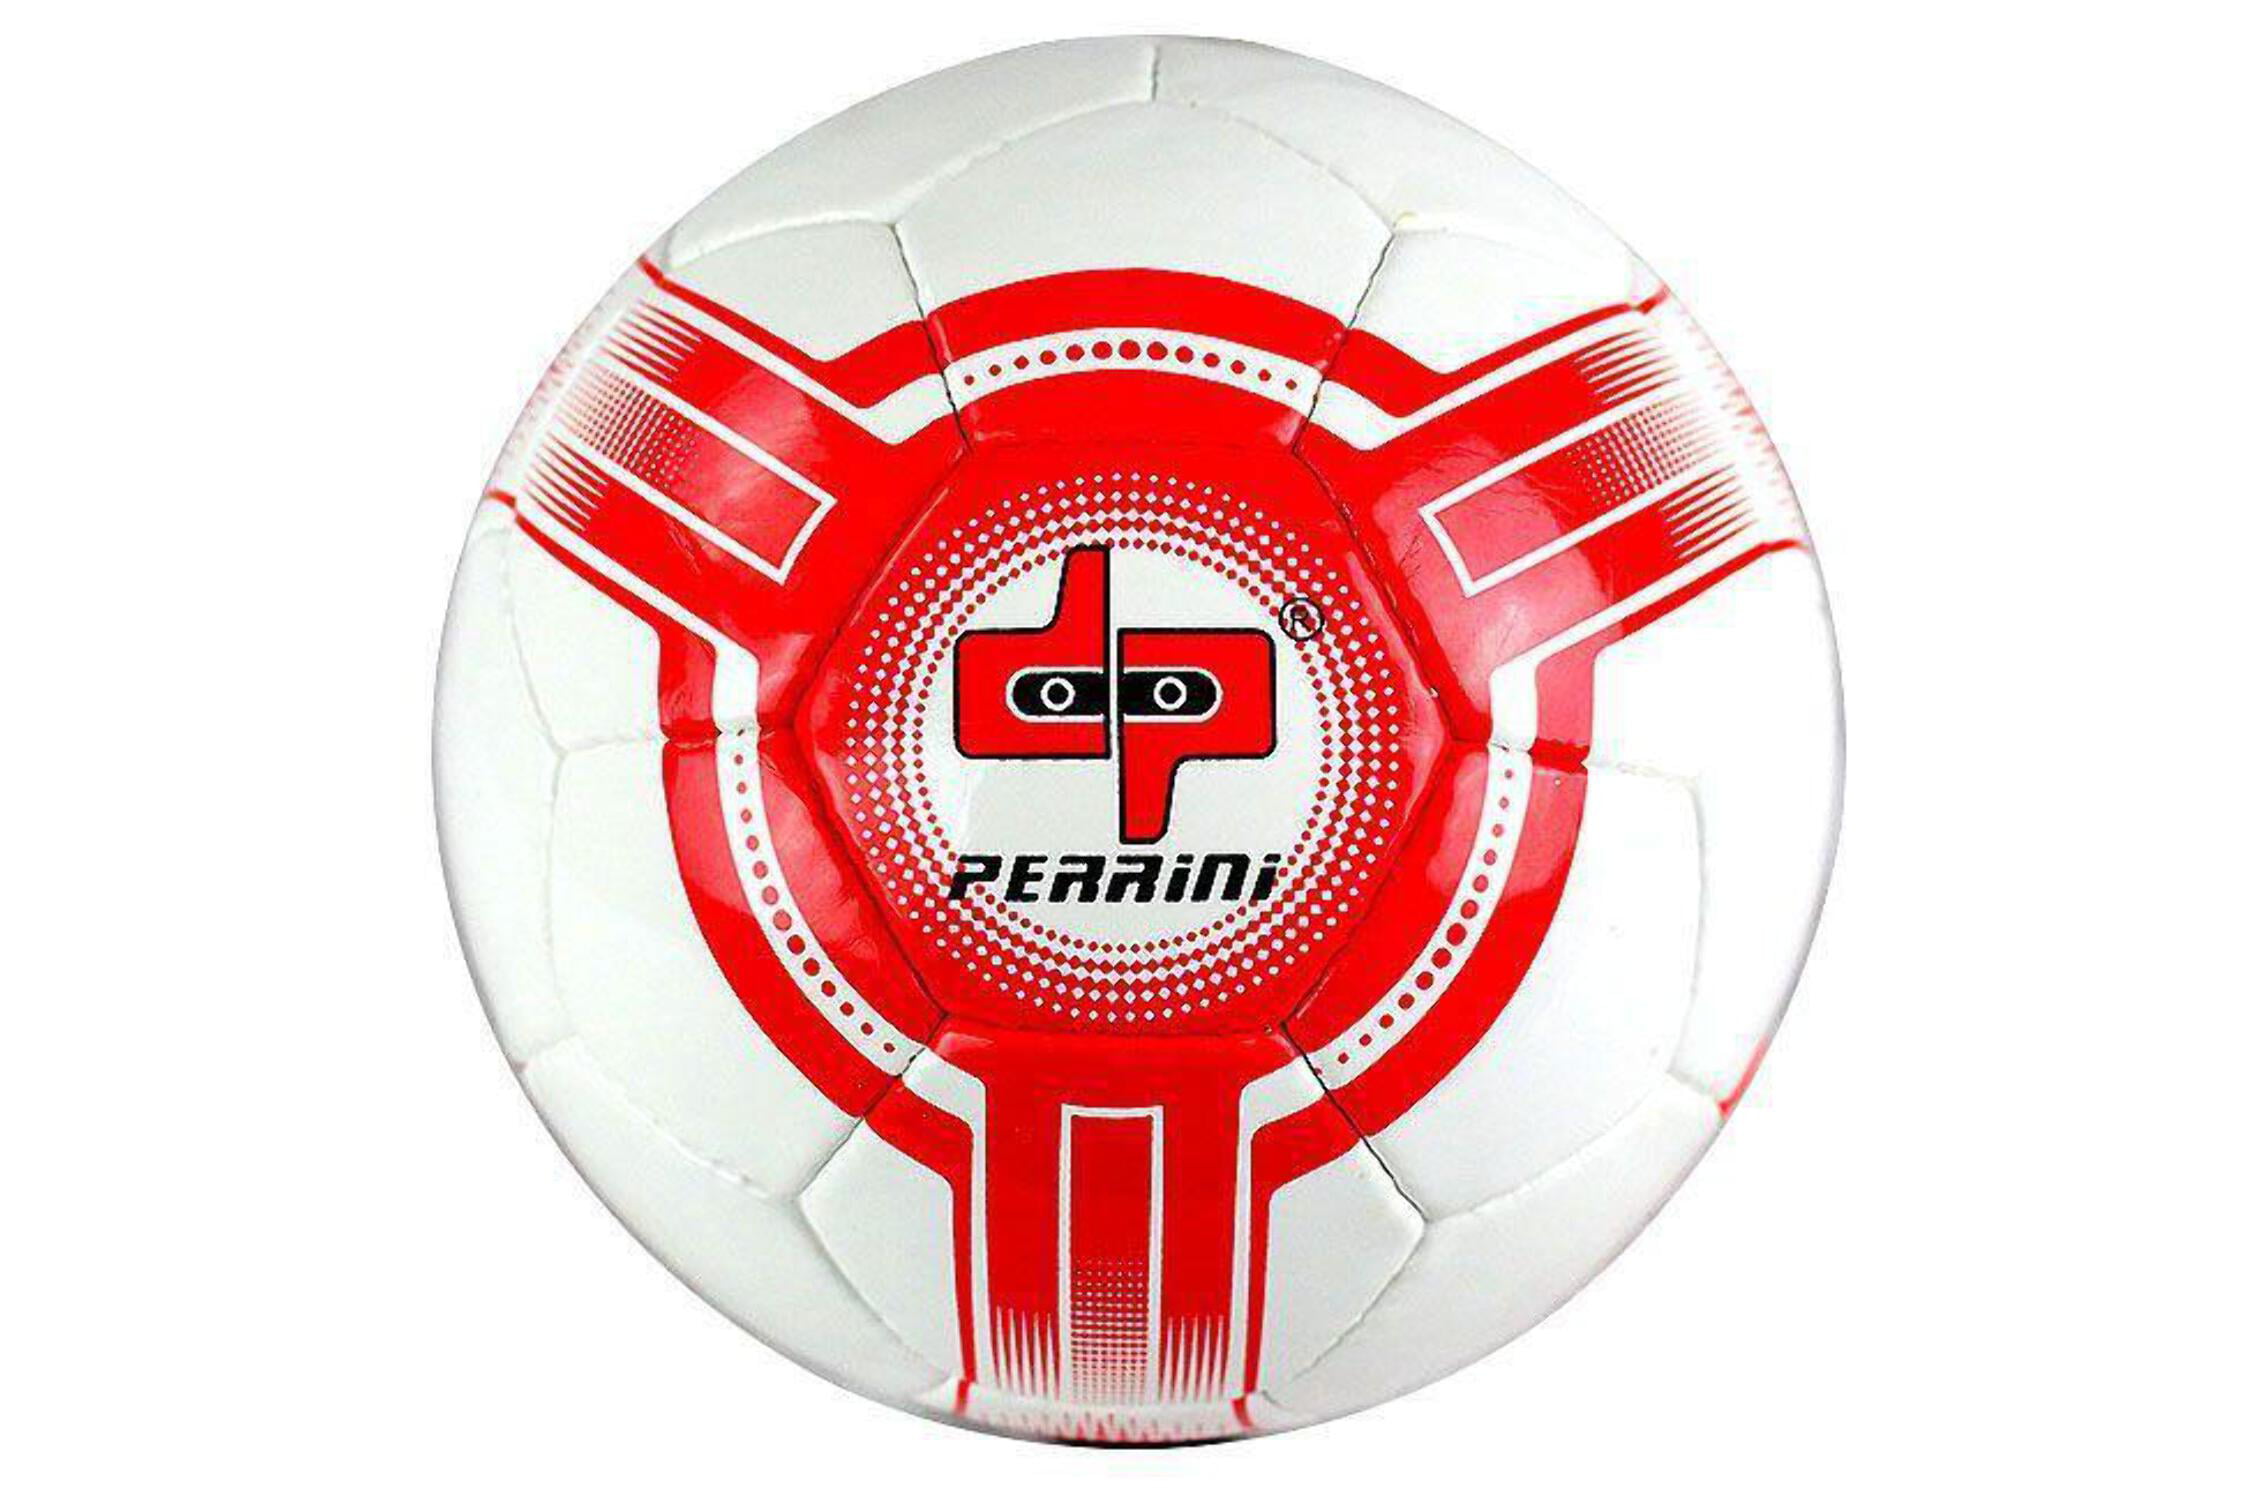 Perrini Futsal Ball White Red Low Bounce Football Official Size 4 